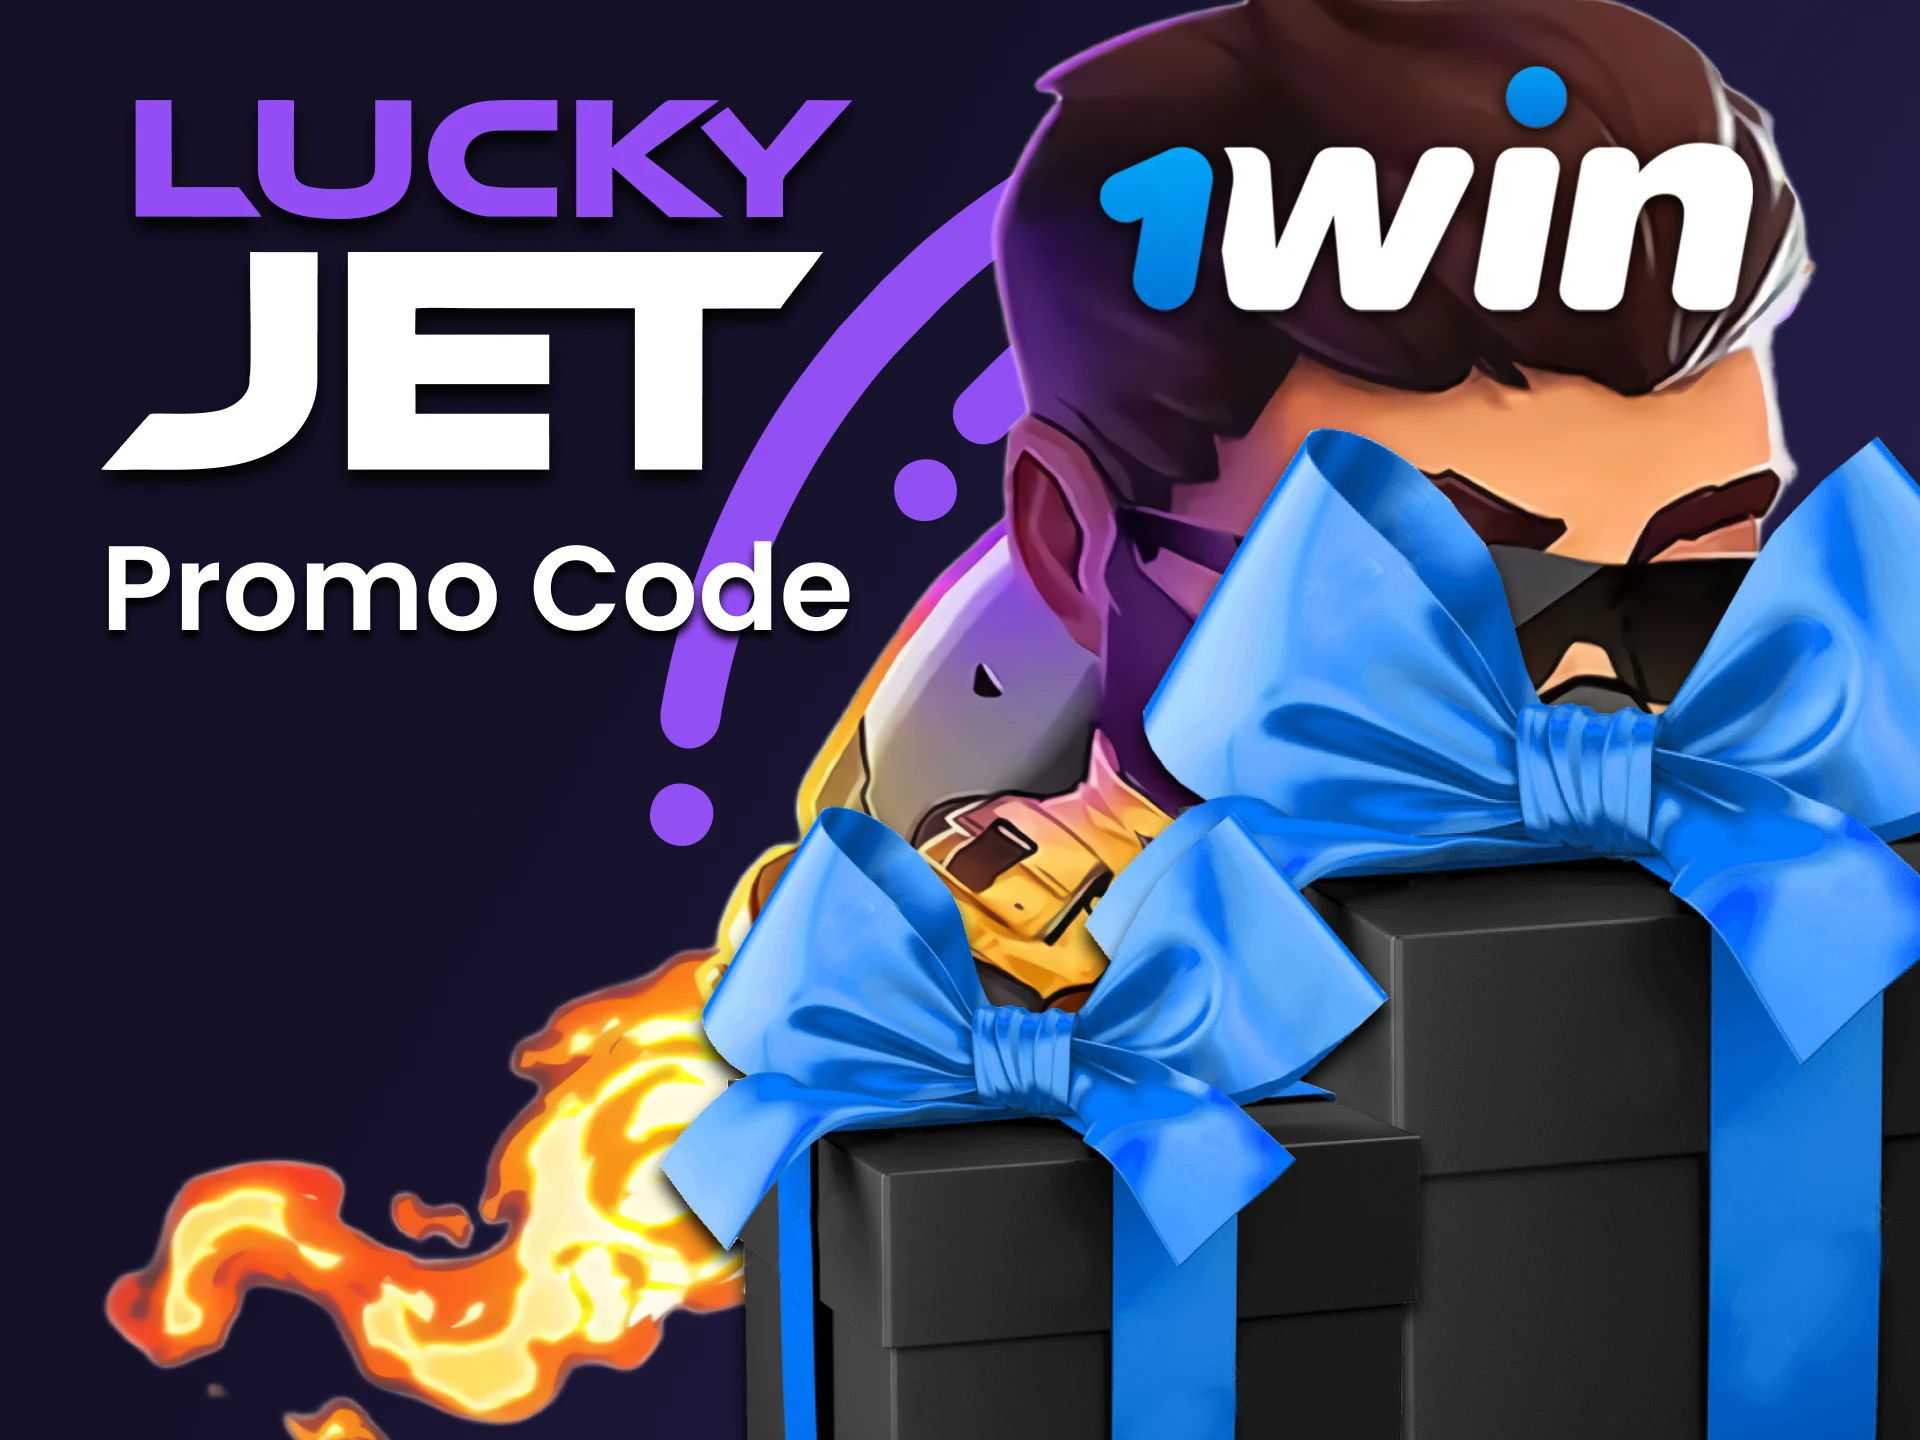 Get a promo code for Lucky Jet from 1win.